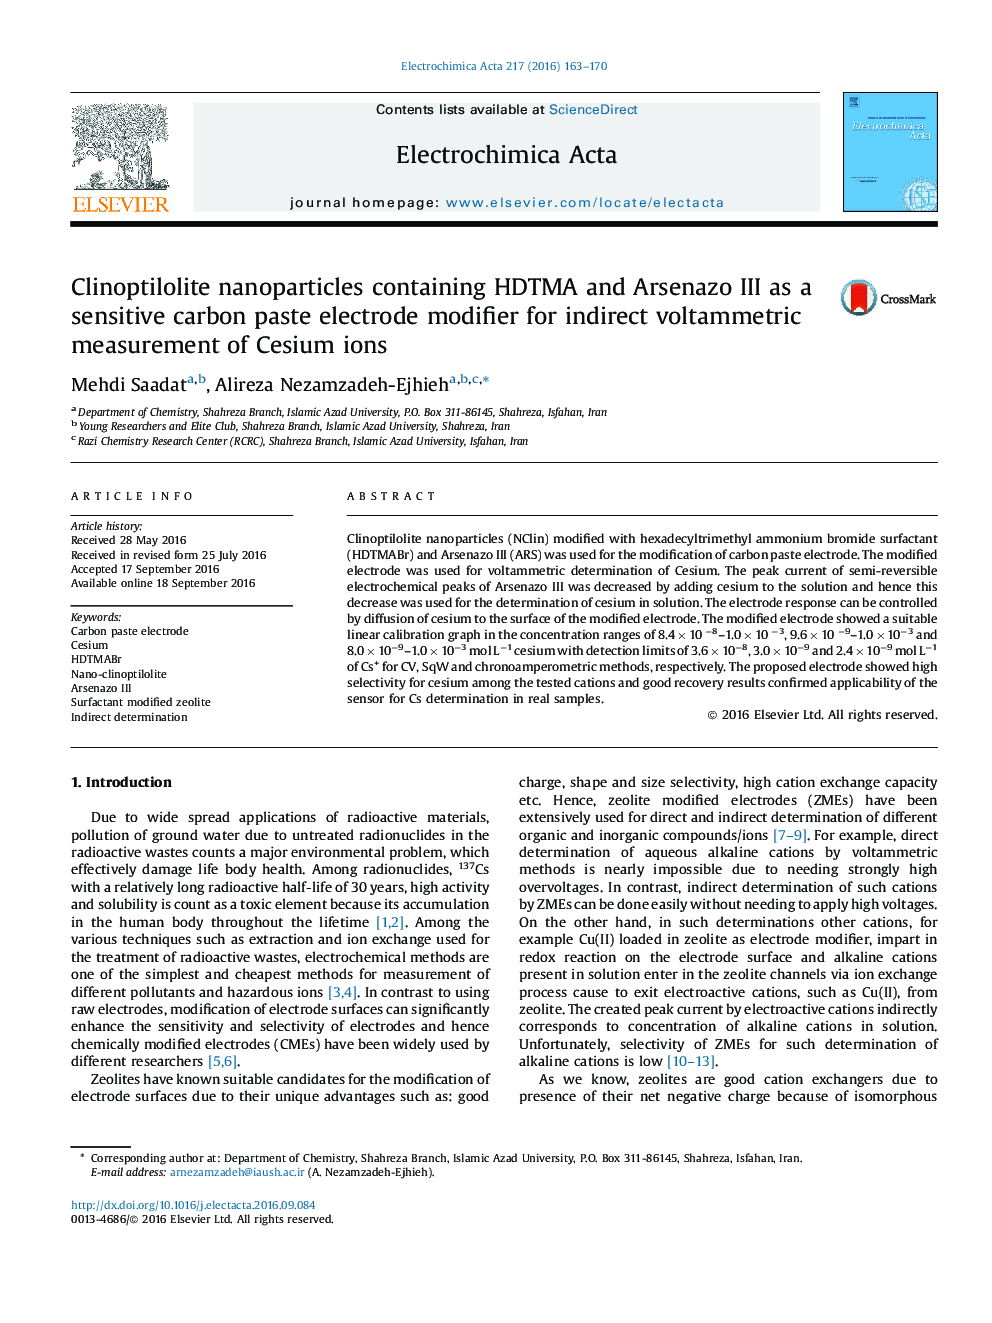 Clinoptilolite nanoparticles containing HDTMA and Arsenazo III as a sensitive carbon paste electrode modifier for indirect voltammetric measurement of Cesium ions